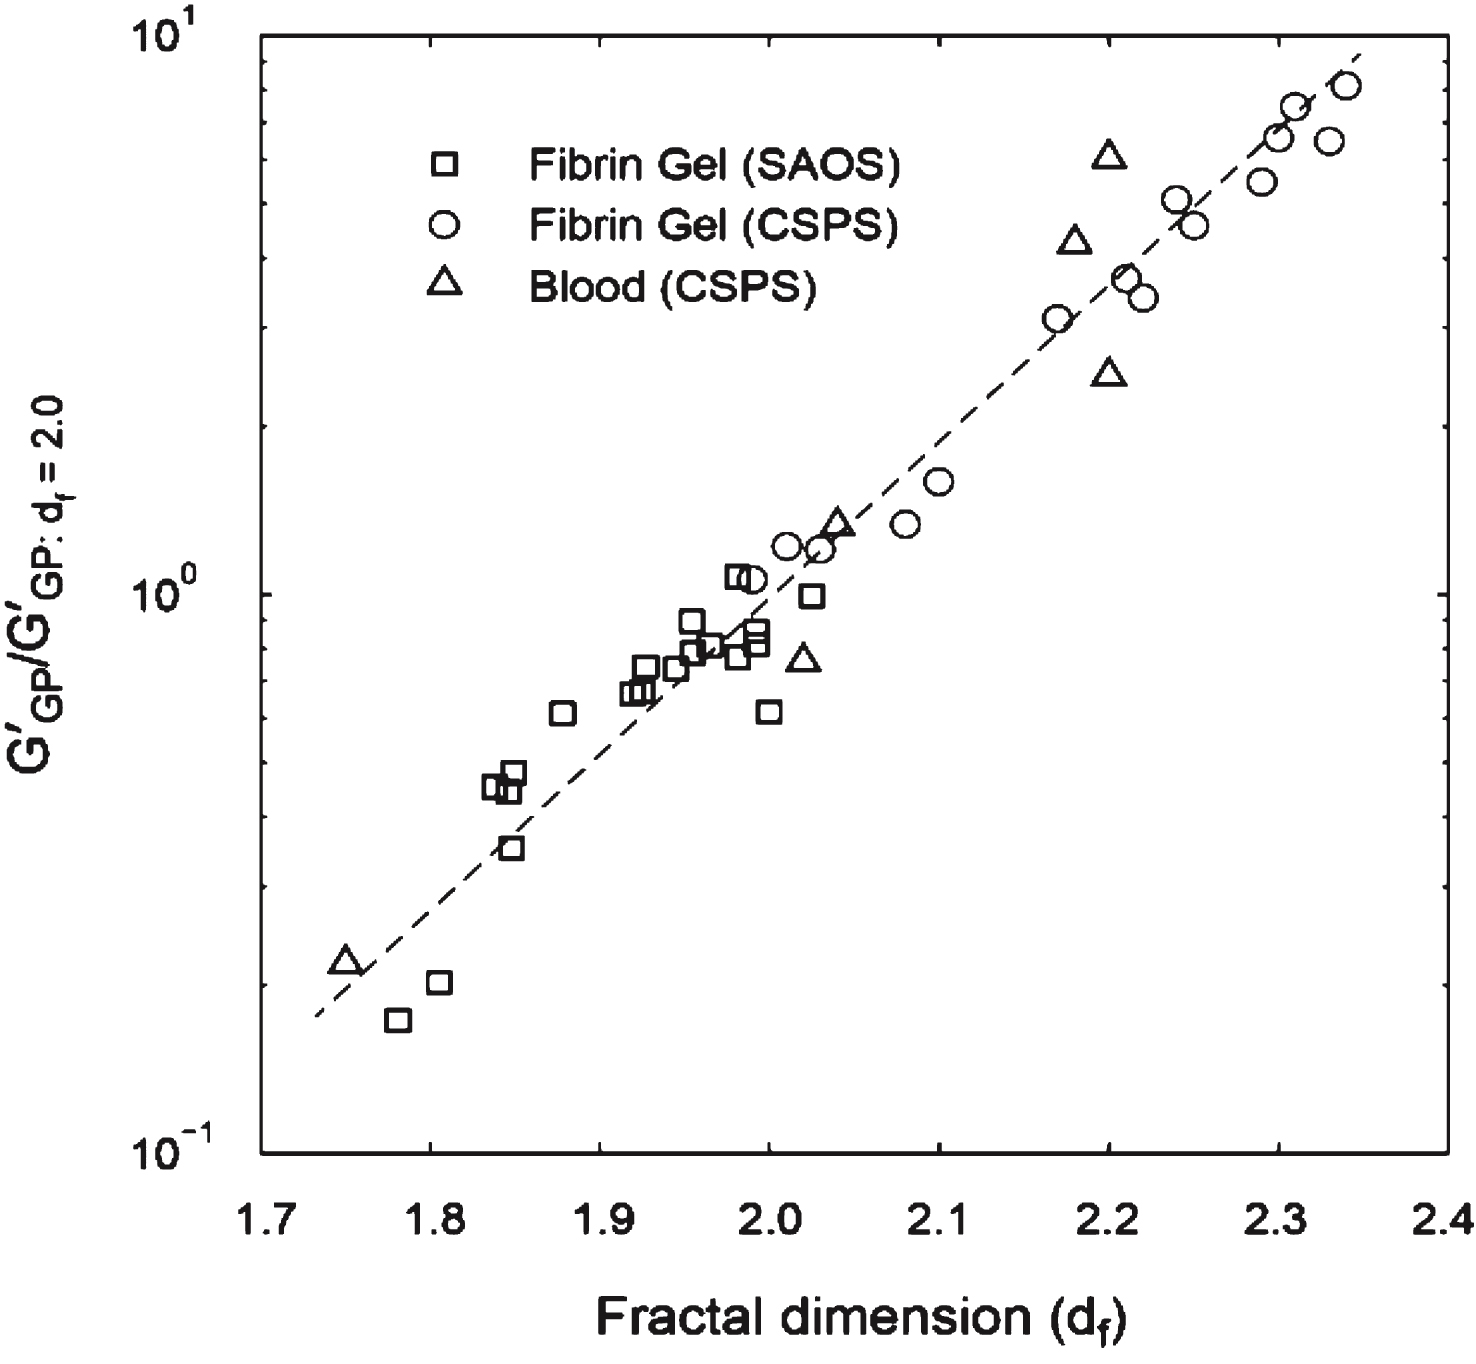 Structure-function relationship in terms of df and incipient clot elasticity for whole blood (CSPS) and fibrin gels (in SAOS and CSPS tests). The values of G′GP and G∥GP′ are normalized by their respective values at df= 2.0. The SAOS results for fibrin gels result from a progressive increase in thrombin concentration at a fixed value of fibrinogen concentration [φ= 0.01 to 0.19 NIH/ml, c = 10 mg/ml].